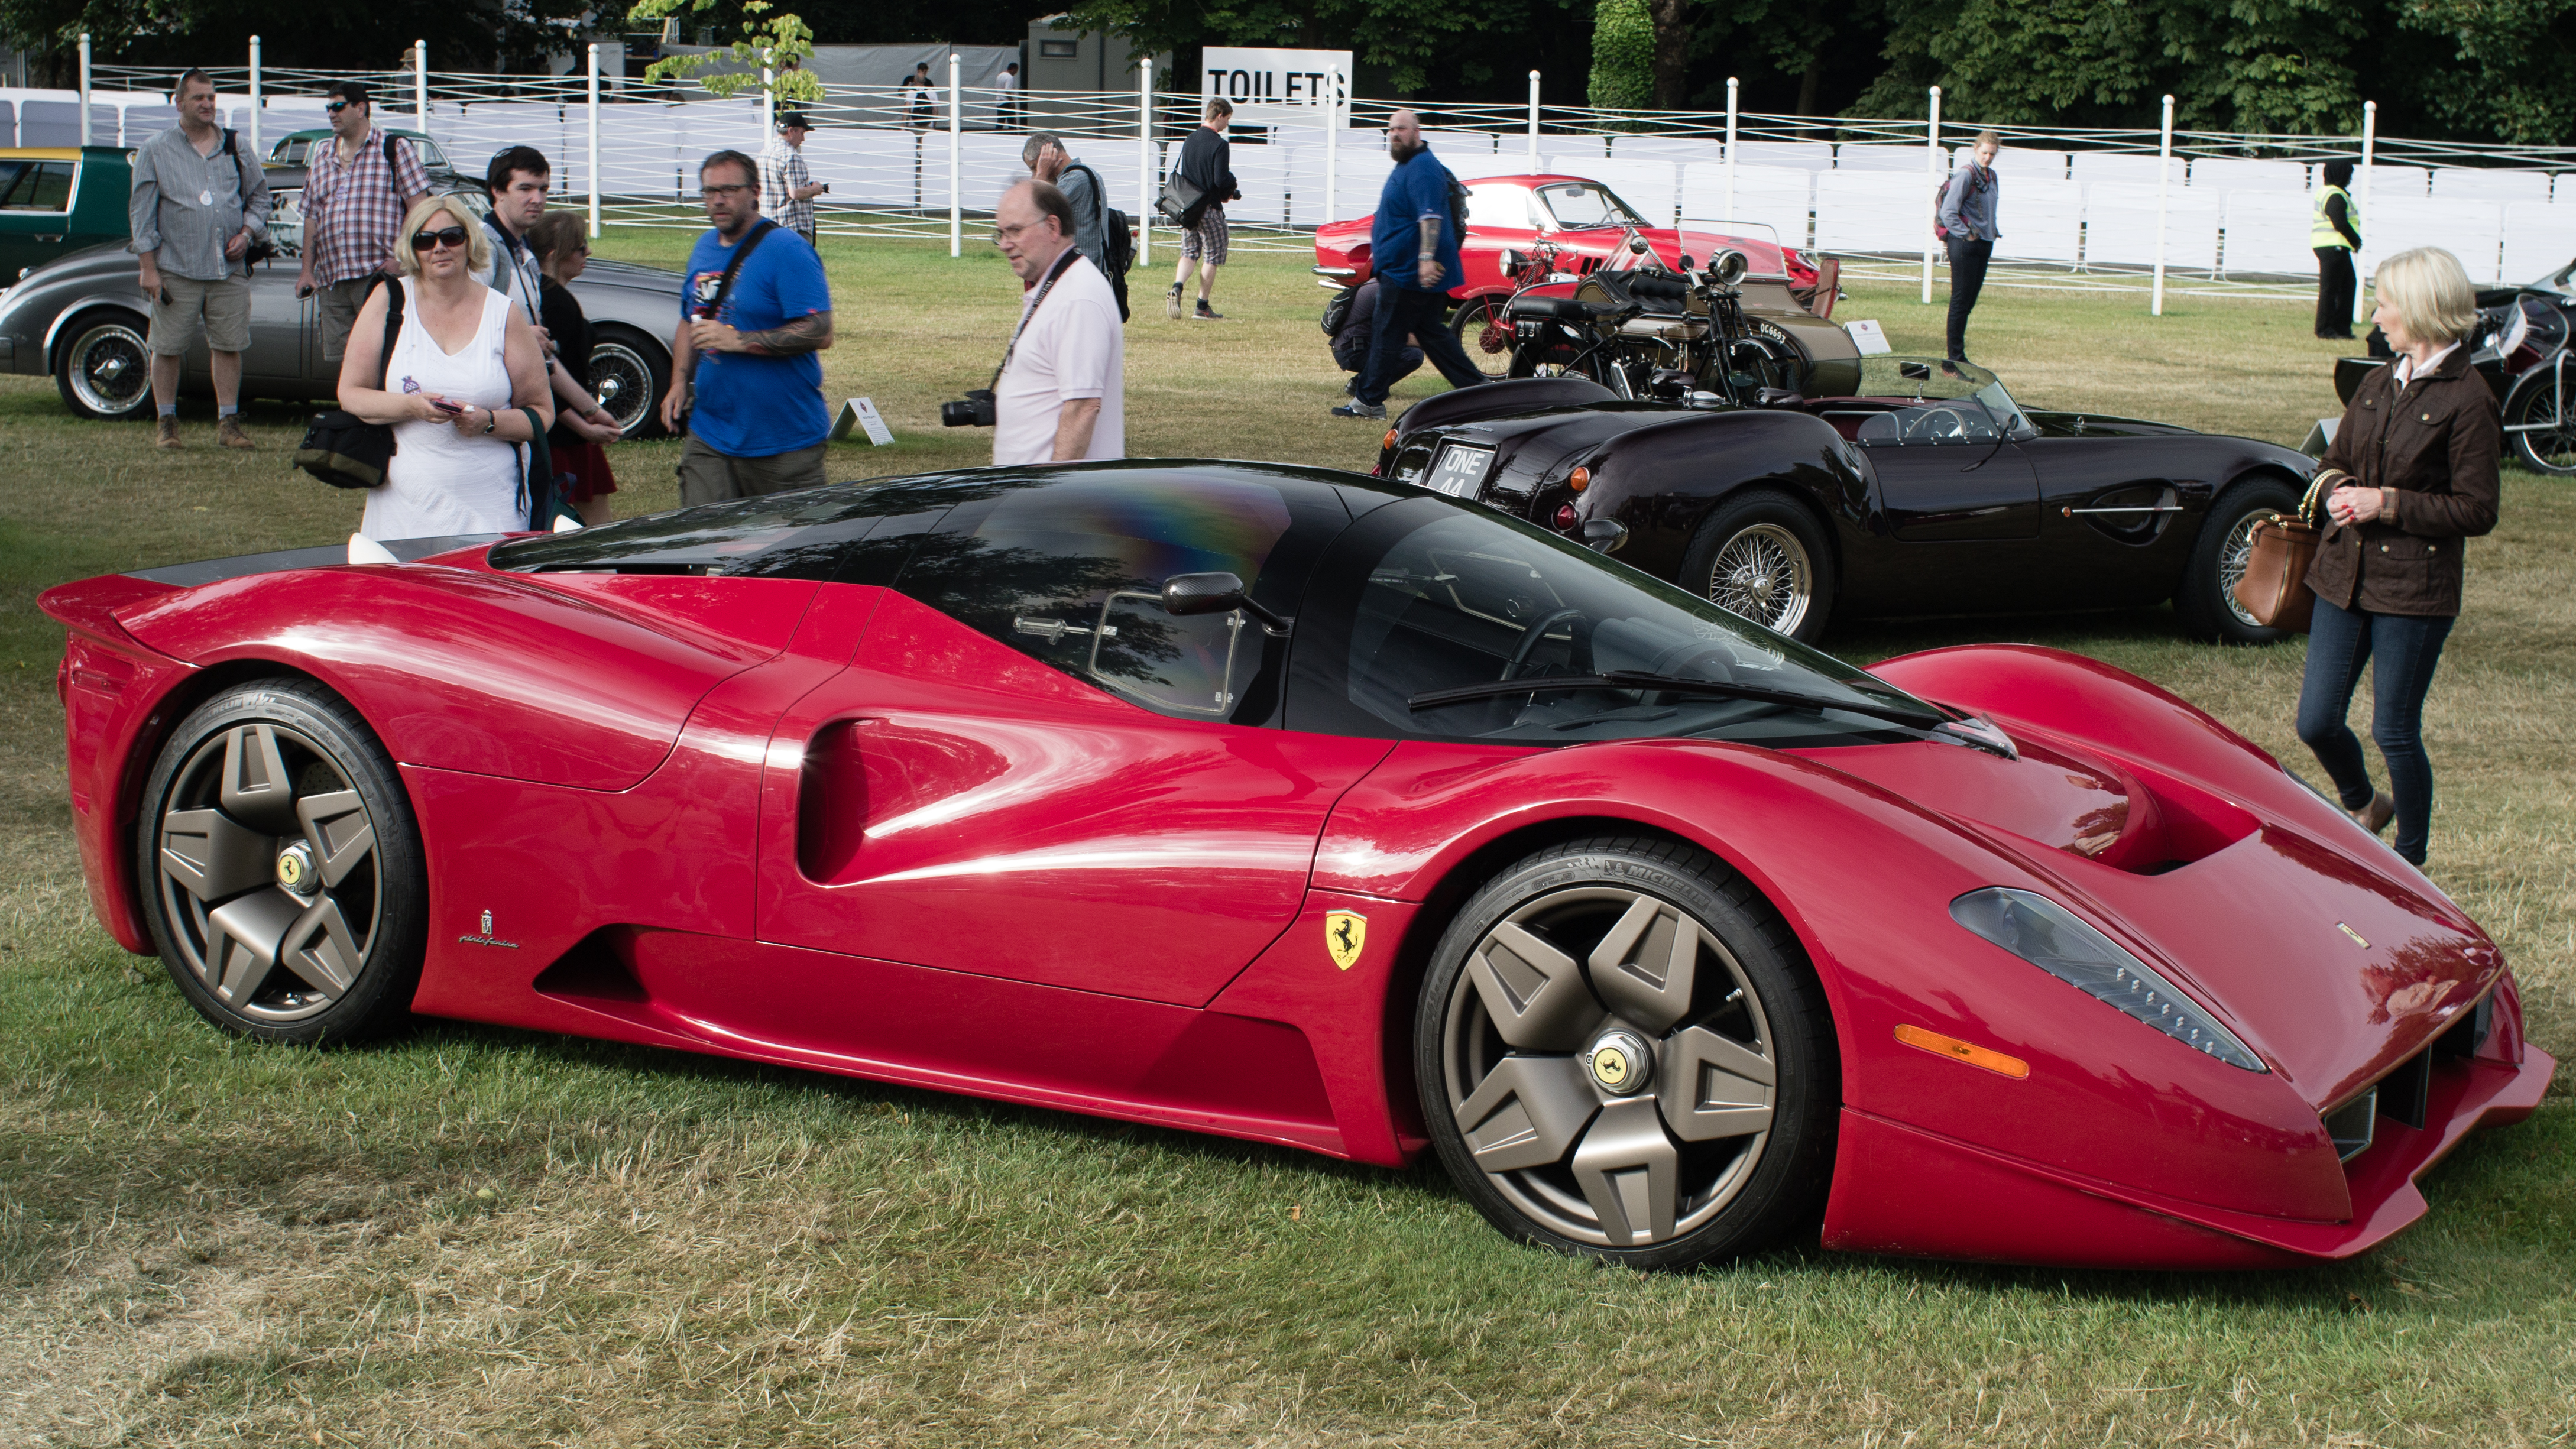 3. Precious Jewels on Four Wheels: The Striking Aesthetics of Rare Supercars